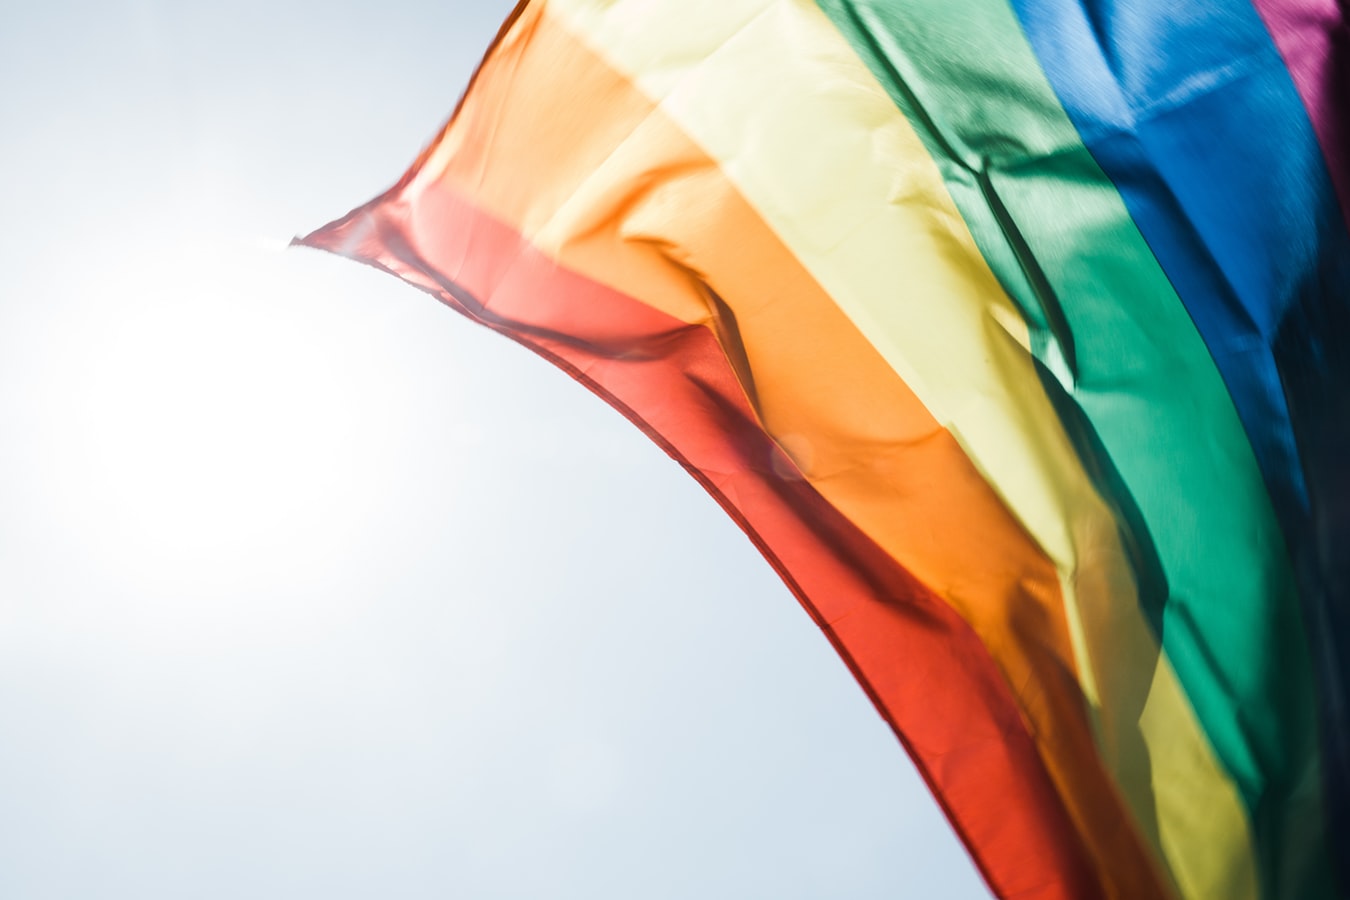 The-flag-of-the-LGBT-community.-There-are-ties-between-substance-abuse-and-the-LGBT-community